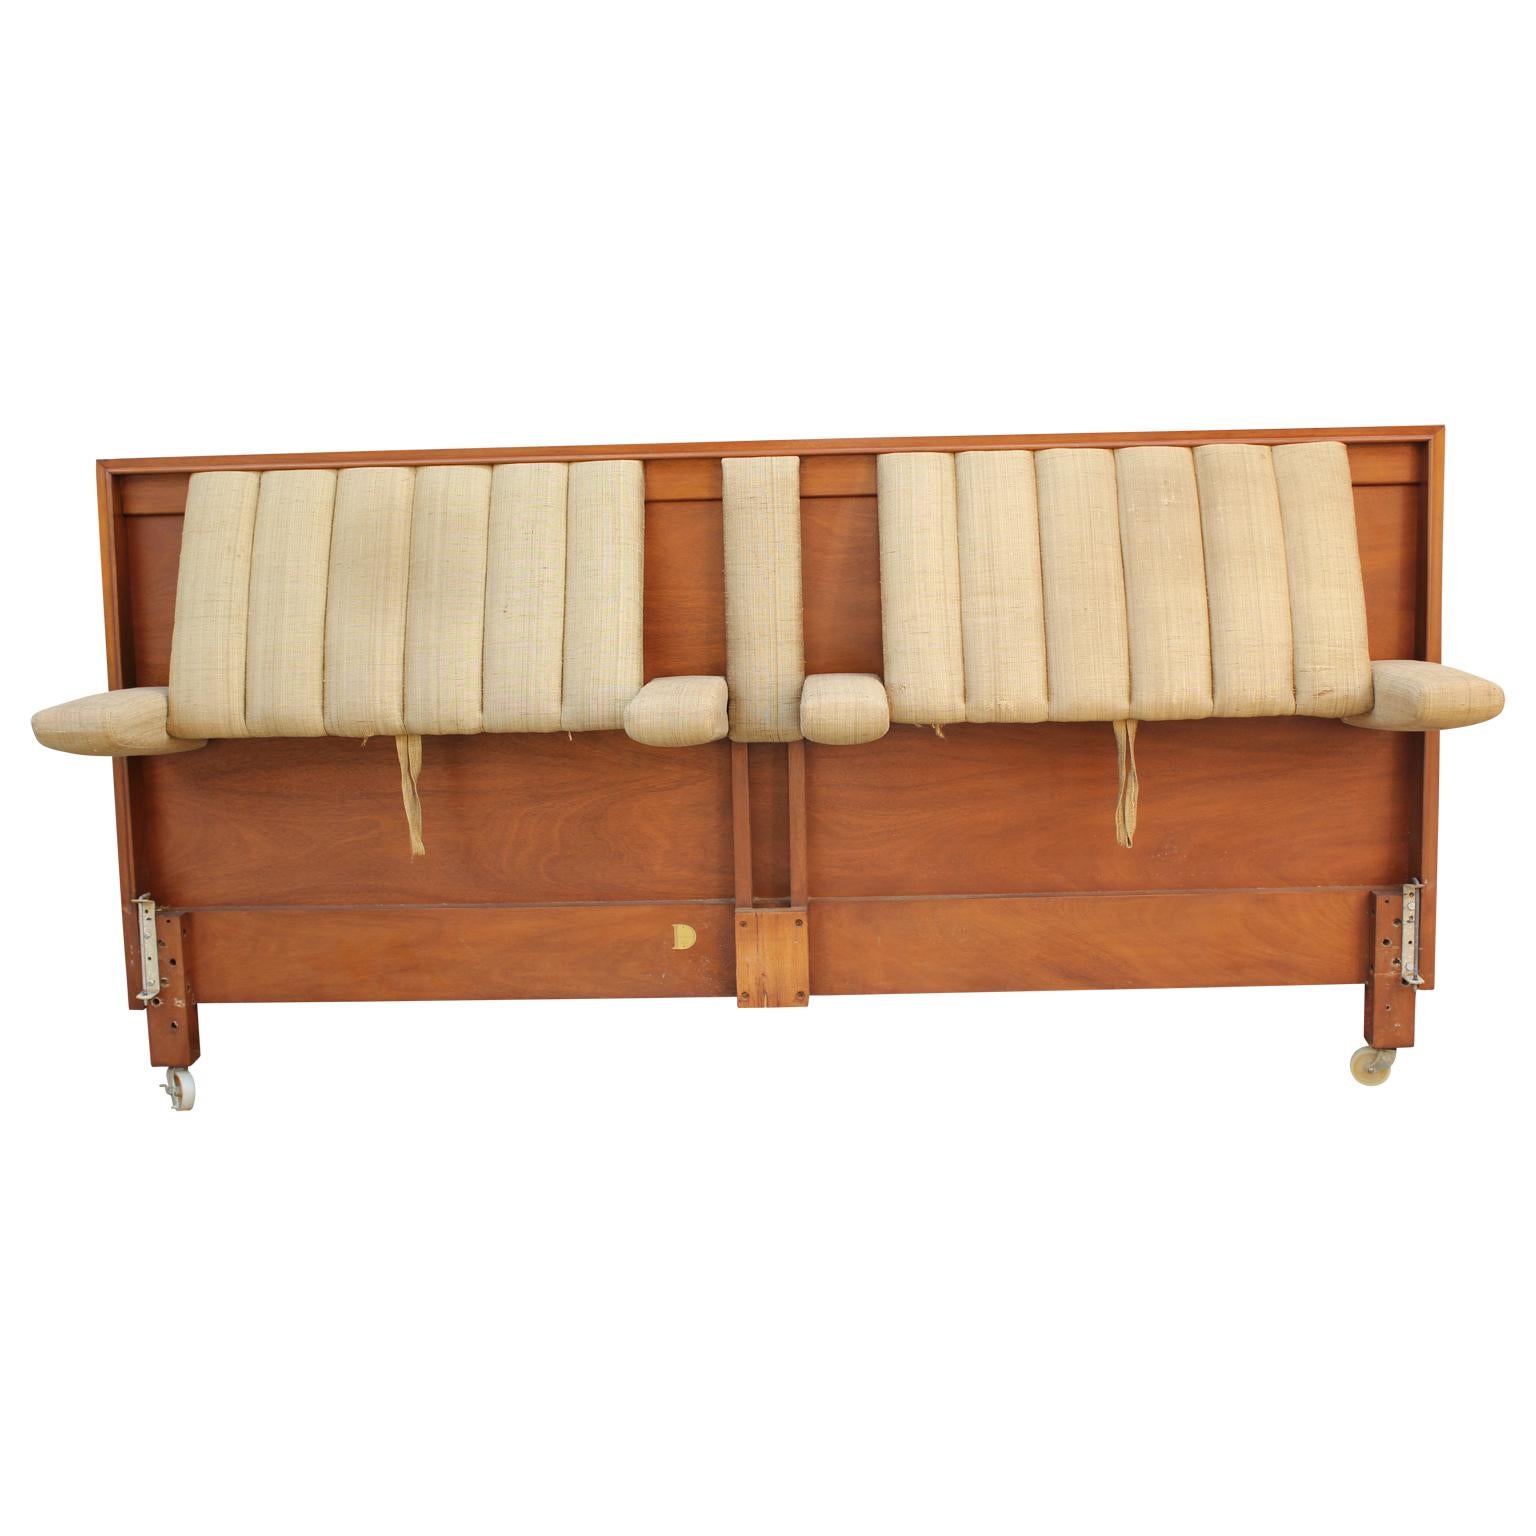 Unique King sized walnut headboard designed by Edward Wormely for Dunbar. This headboard features two pulls that tilts the headboard back and drops down arm rests for optimal comfort while sitting up in bed. Wonderful and rare piece! Model